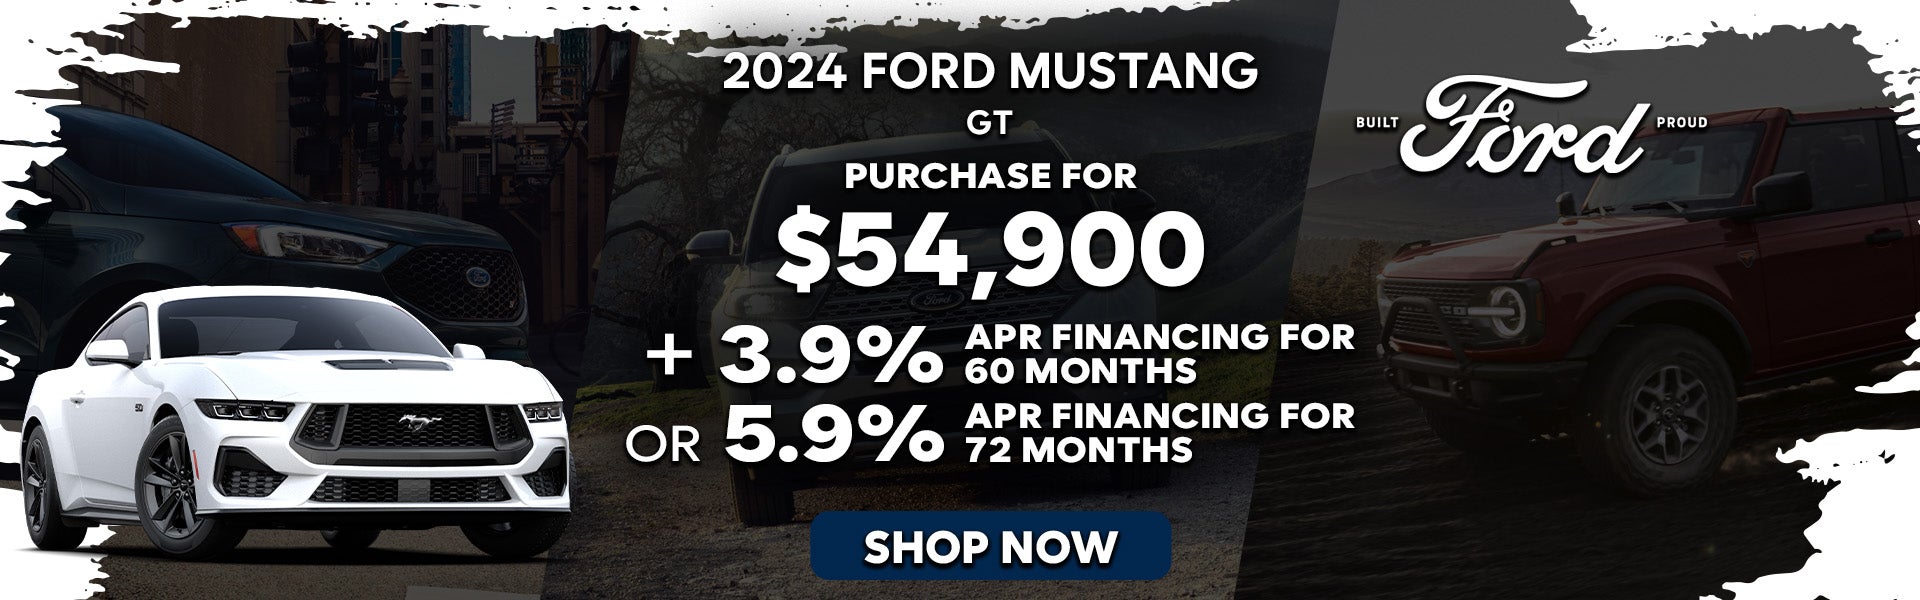 2024 Ford Mustang GT Special Offer